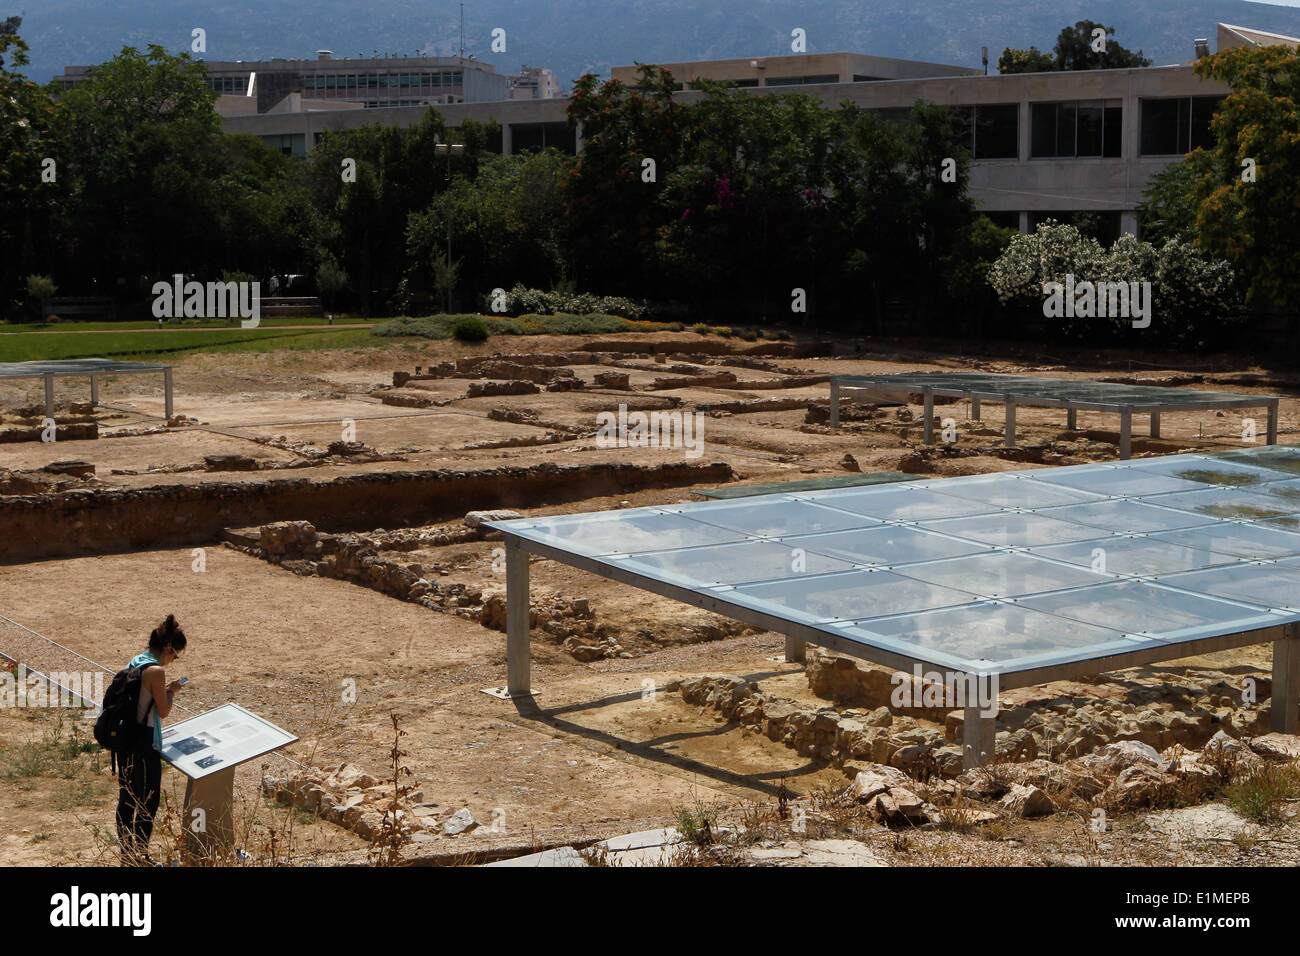 A new archaeological site open in the center of Athens, Aristotle's Lyceum. The discovery of the Lyceum and the adjacent Palaistra, or wrestling school, was made by archaeologists in 1996 and was hailed as the "discovery of the century" by international media, not just because it is where Aristotle taught some 2,500 years ago, but also because it contained valuable information regarding the topography of ancient Athens. Stock Photo